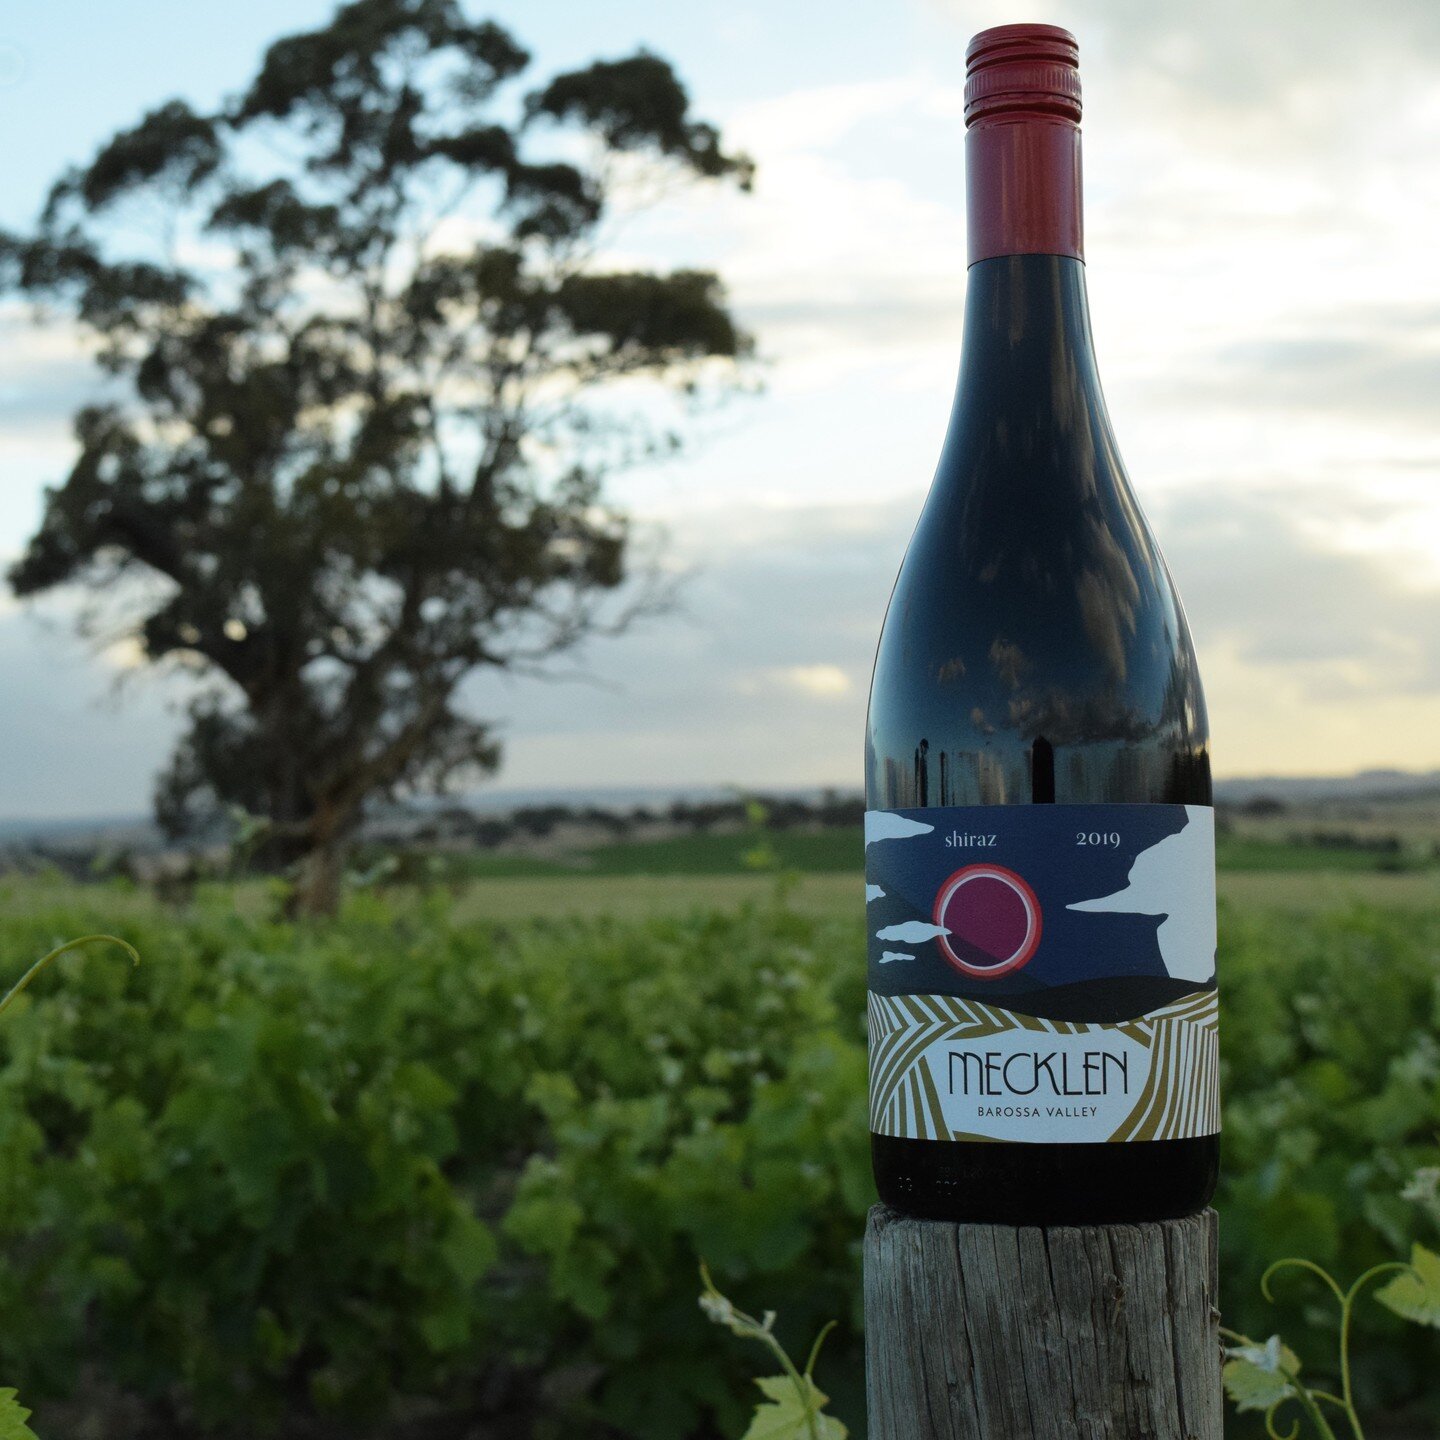 Mecklen Shiraz 2019. Made from grapes gown in our Family vineyard, situated in the Gomersal sub-region of the Barossa Valley

Ripe plum and blackberry fruit aromatics, with plenty of dark fruit, toasty oak, finishing with soft ripe tannins on the pal